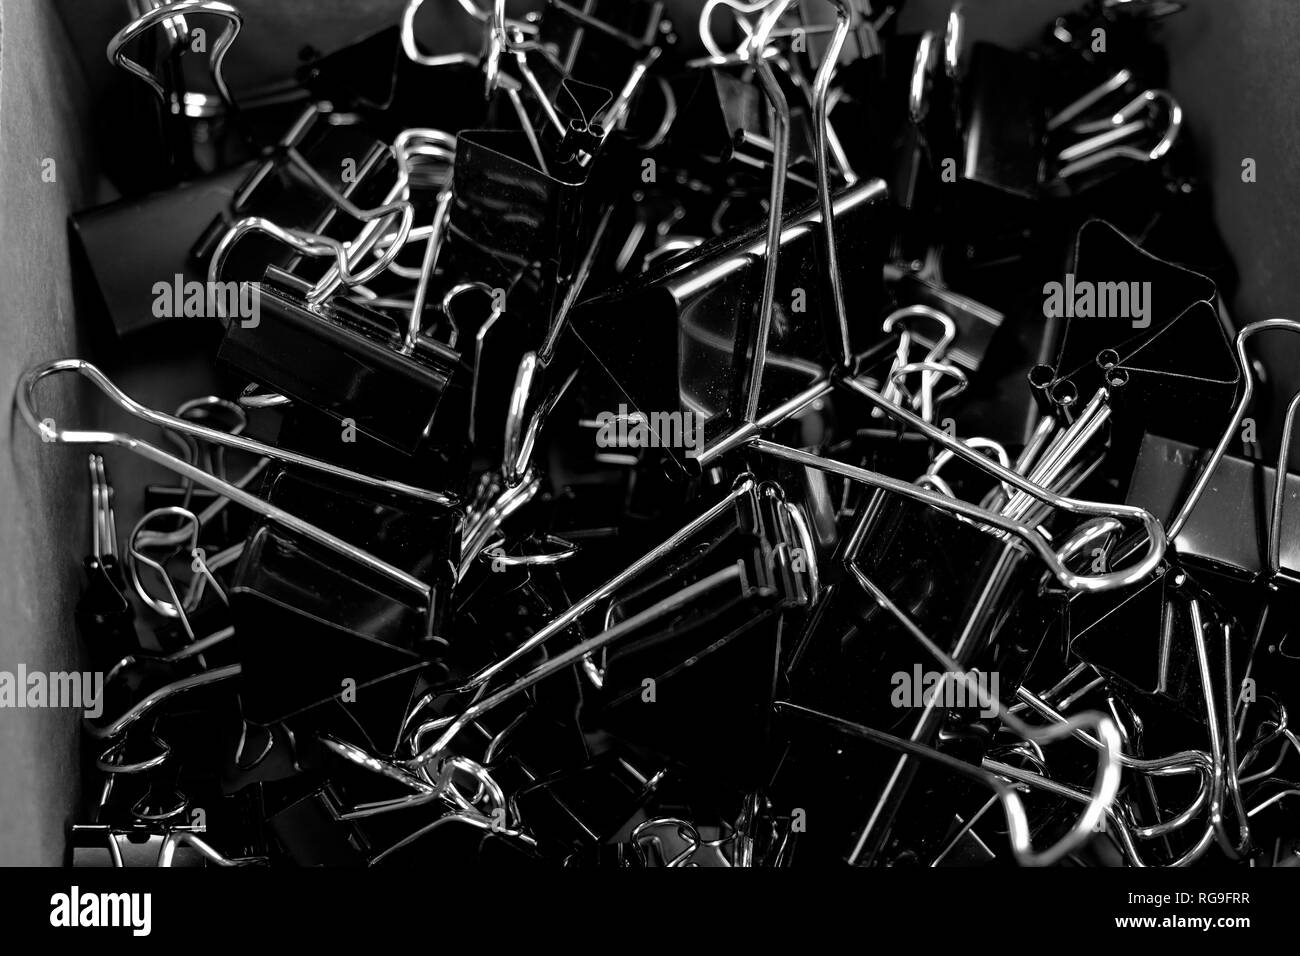 Box of binder clips binderclips office supplies of paperclips on desk Stock Photo